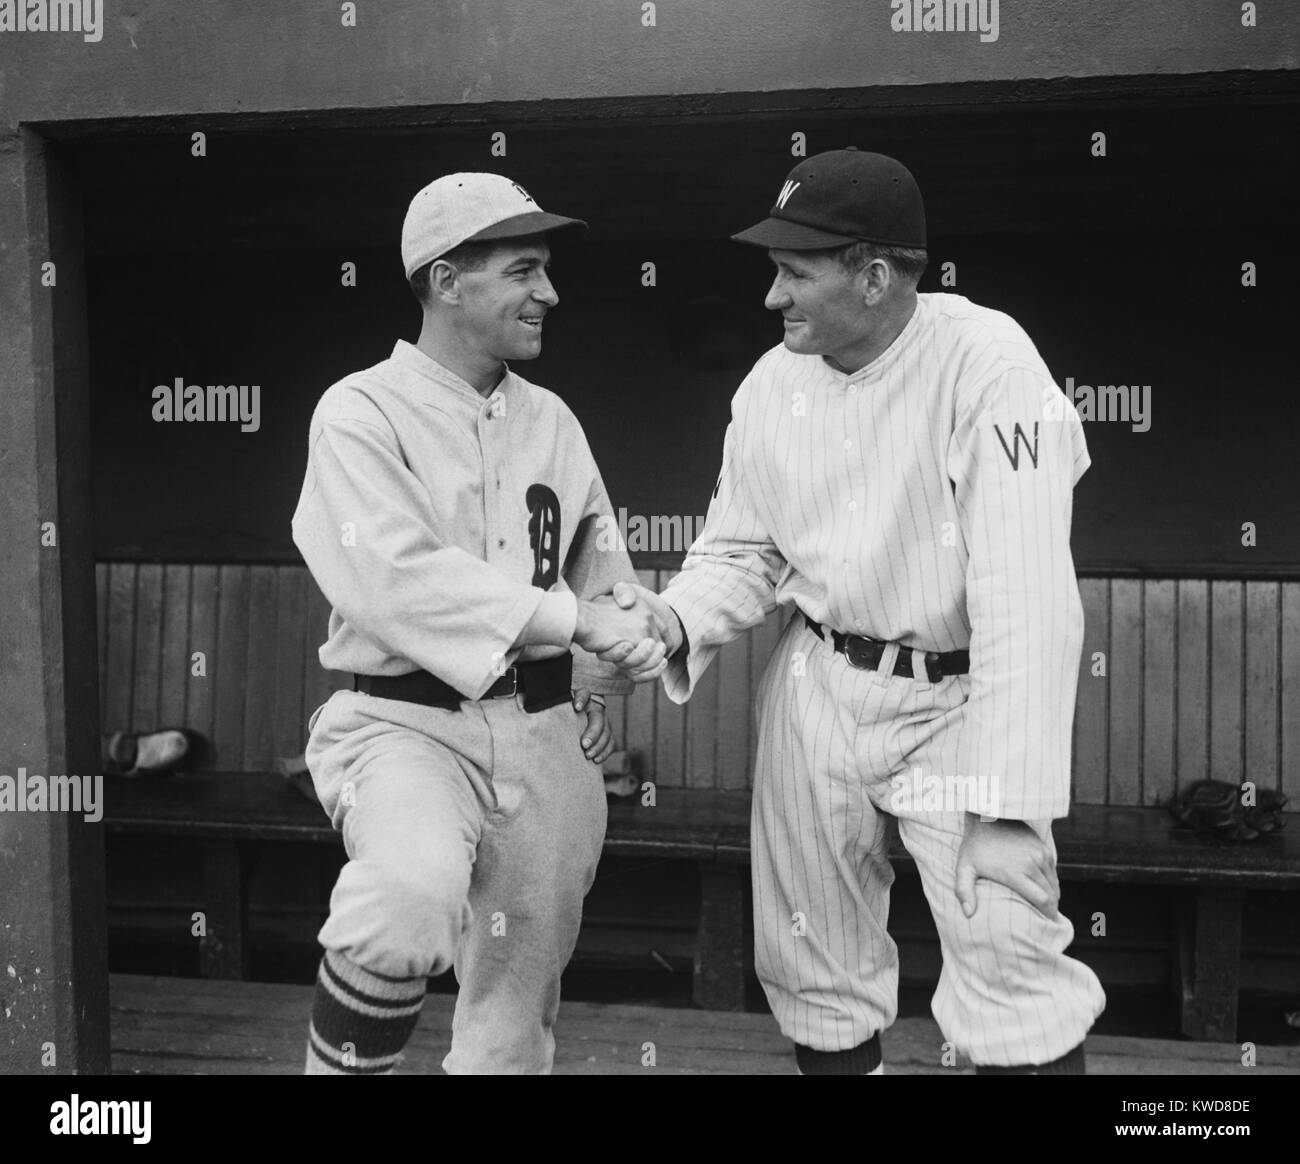 Former teammates Walter Johnson and Bucky Harris meet as managers of opposing baseball teams. Bucky's Detroit Tigers were playing against Johnson's Washington Senators, June 6, 1929. (BSLOC 2015 17 42) Stock Photo